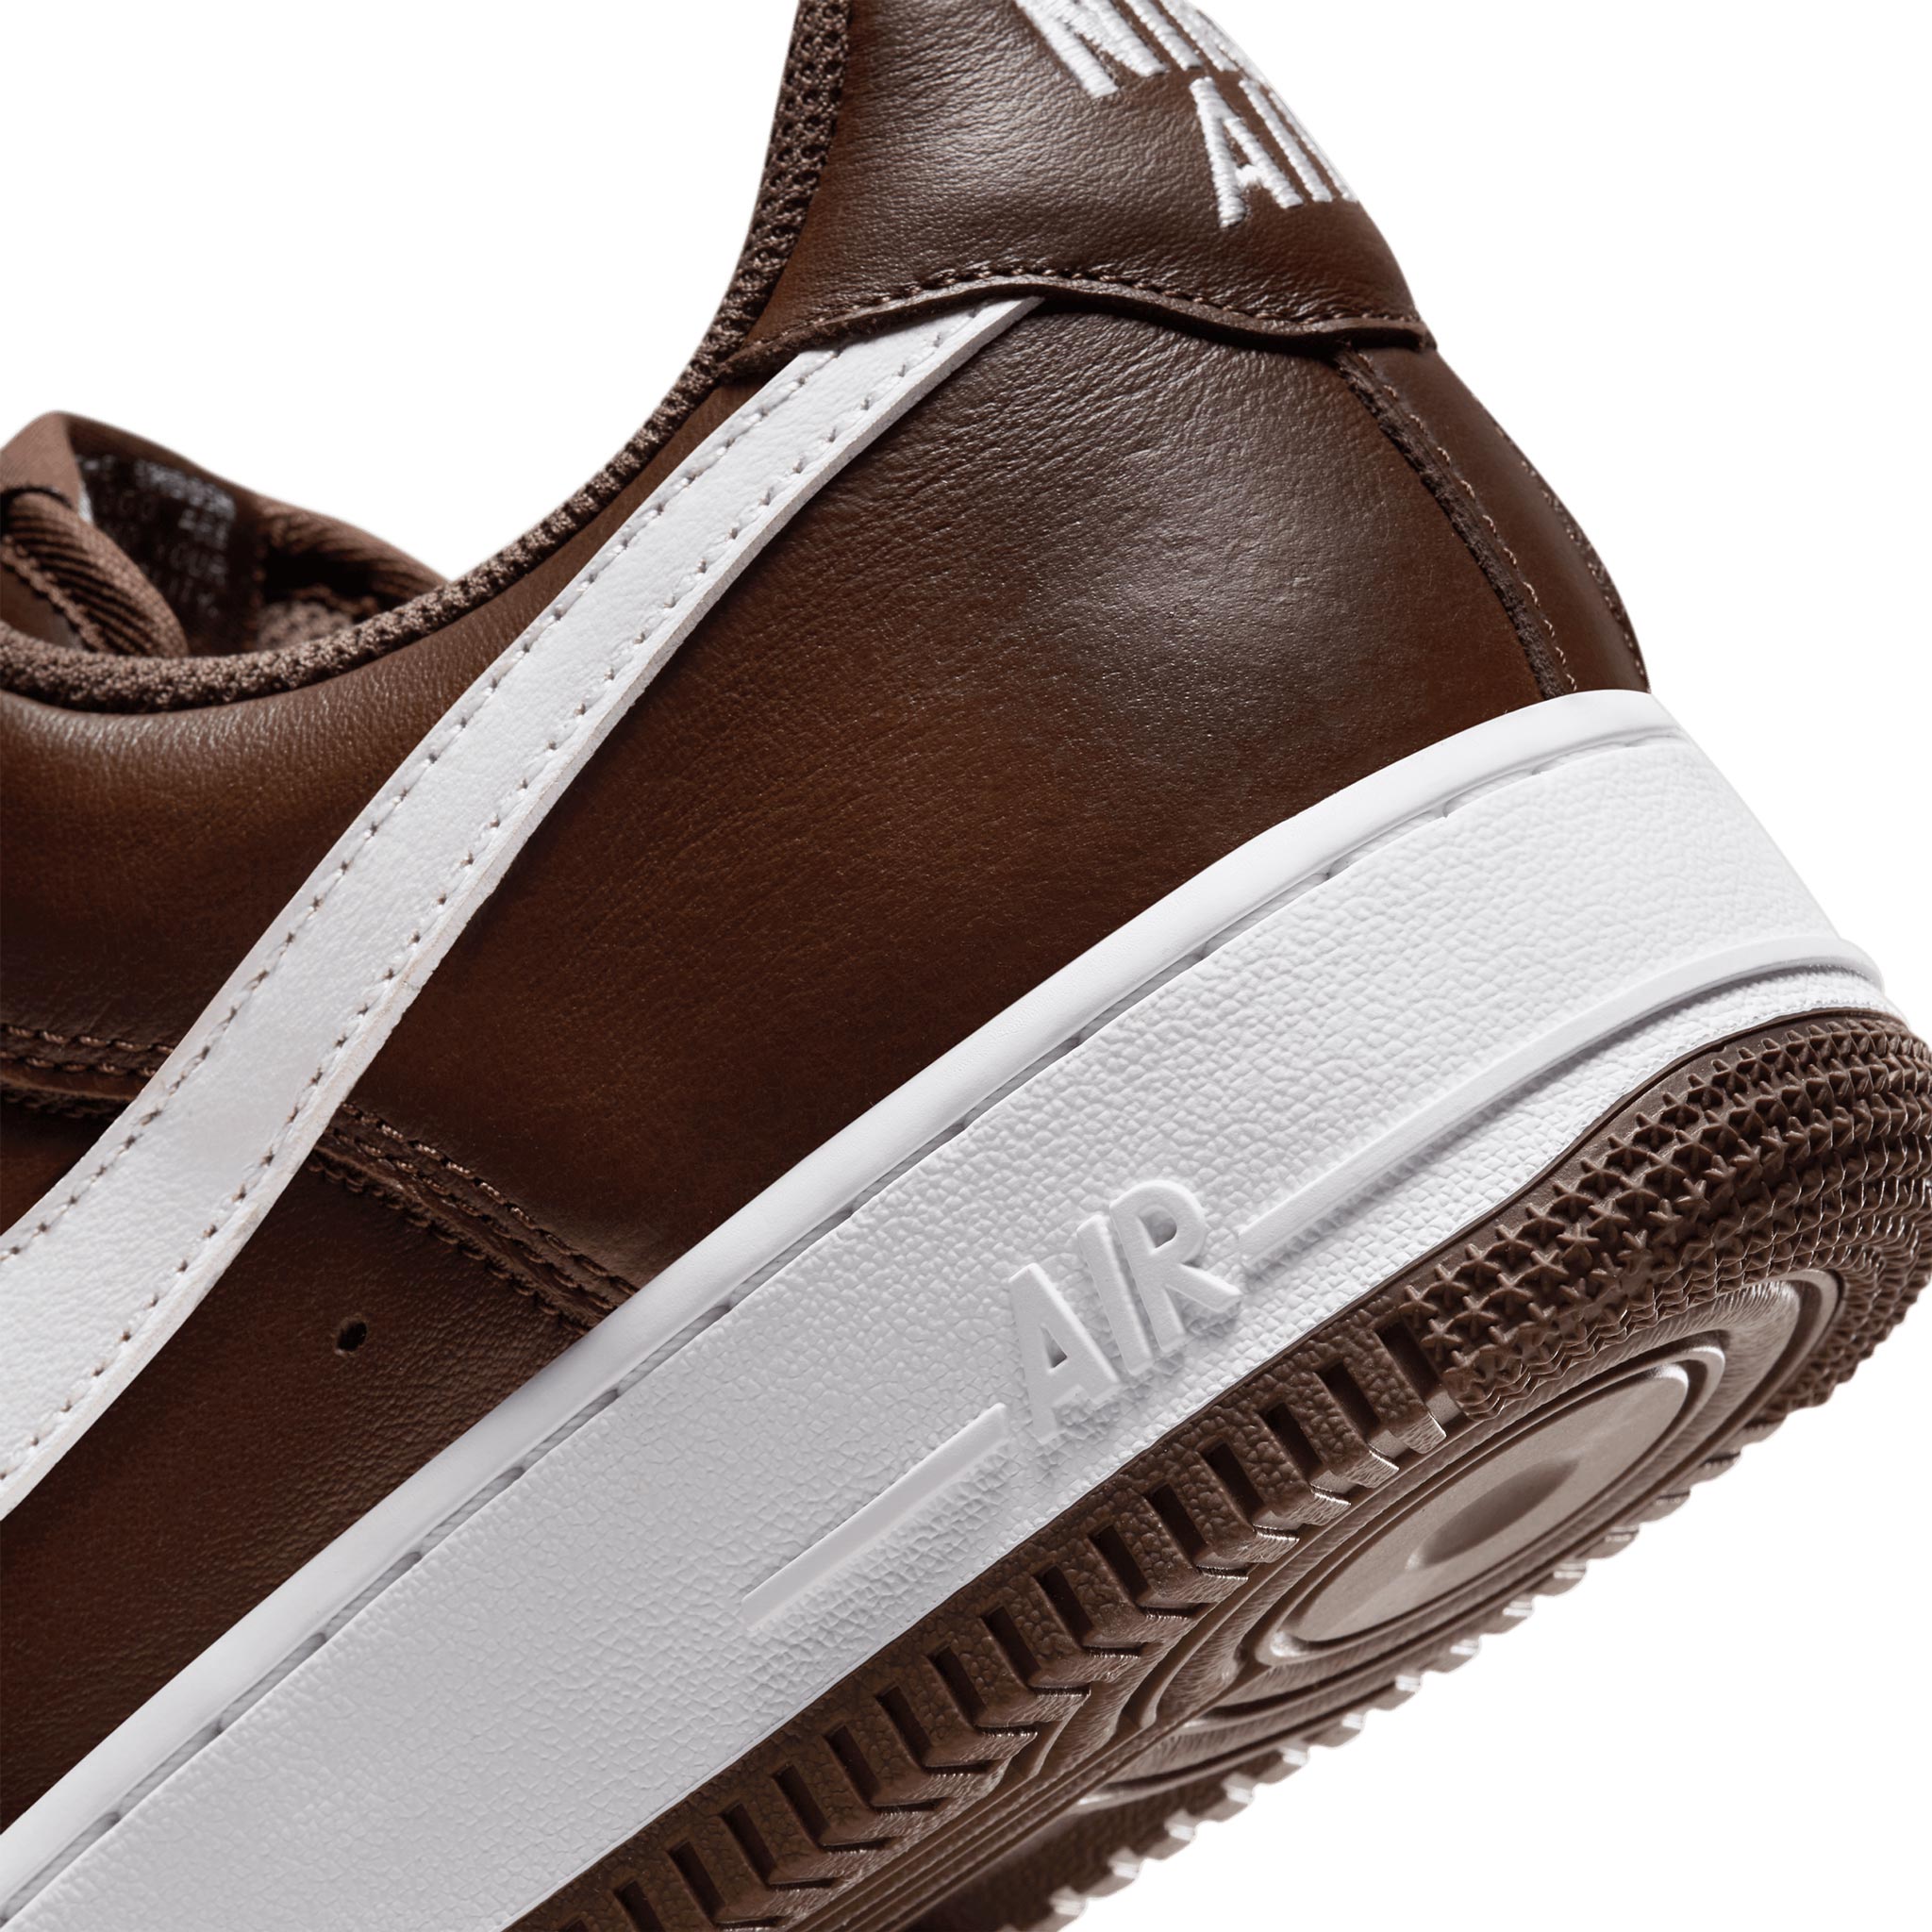 Air Force 1 Low Retro Chocolate FD7039-200